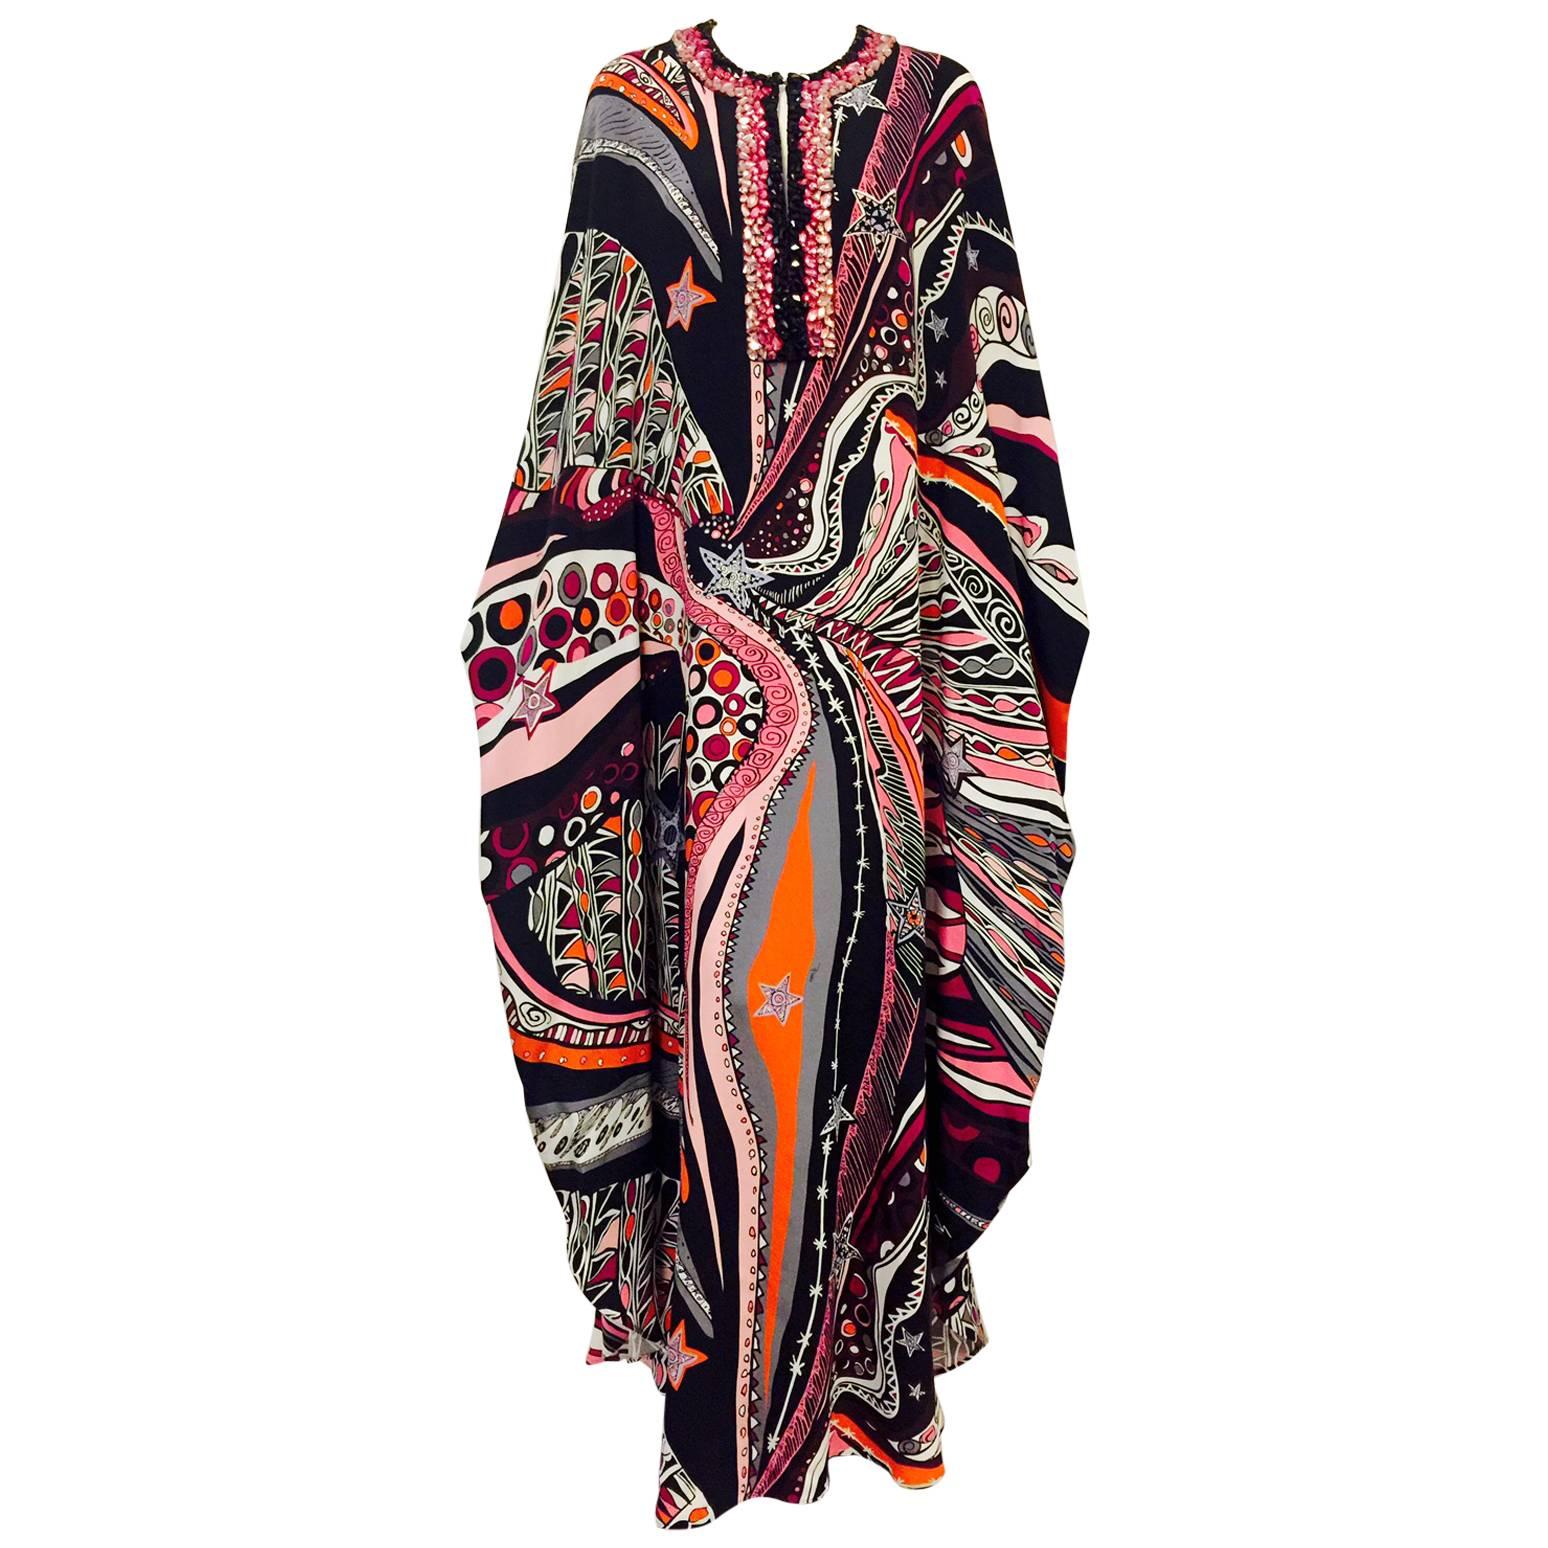 NWT Emilio Pucci Abstract Print Silk Cady Caftan With Embellishments